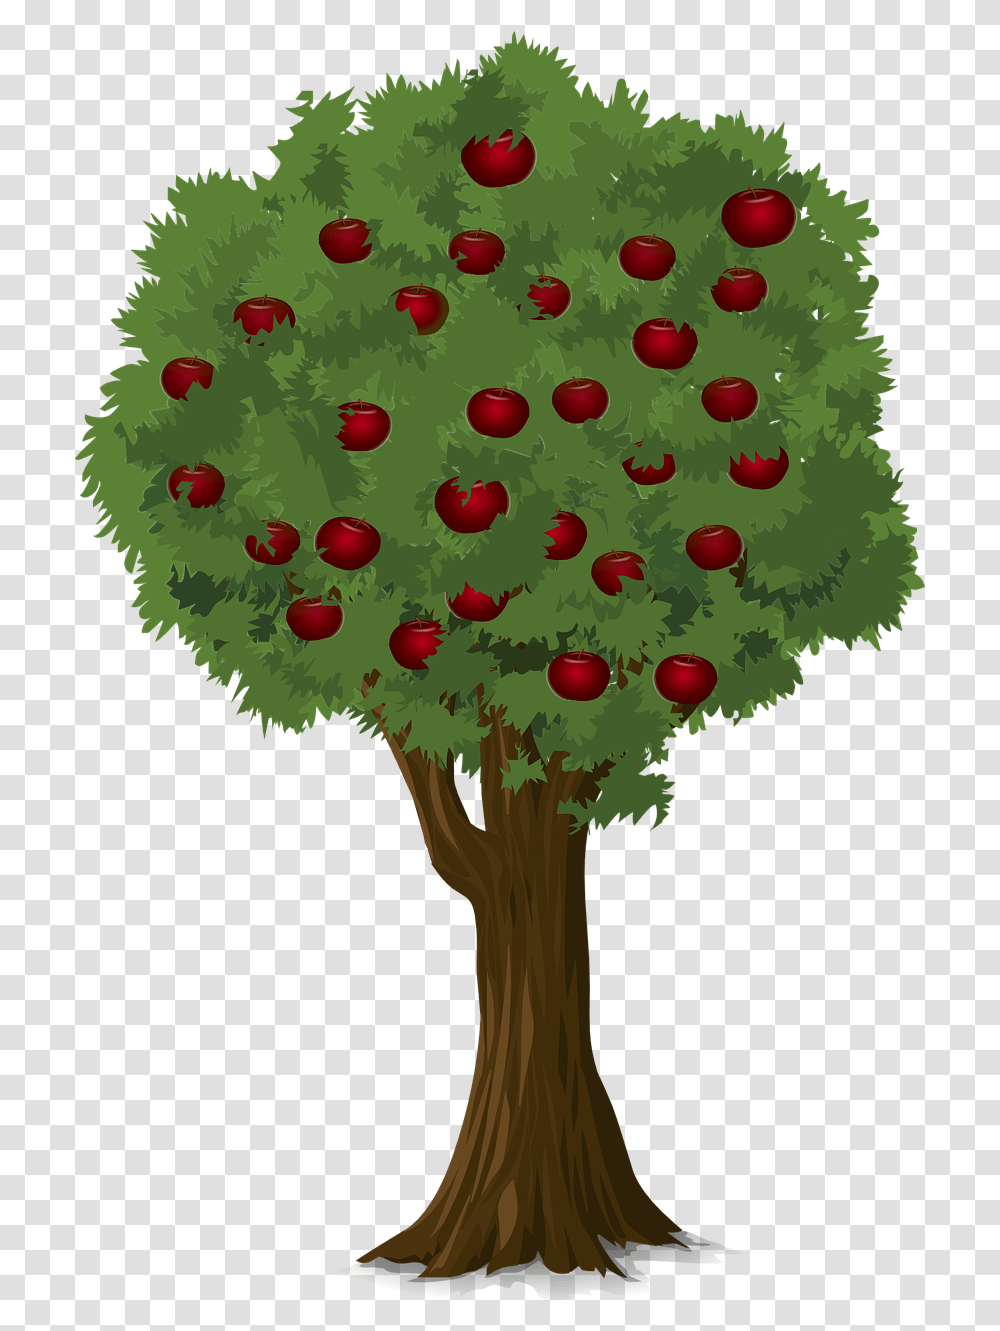 Tree Apple Nature Image Can Guinea Pigs Eat Apple Tree Leaves, Plant, Fruit, Food, Cherry Transparent Png